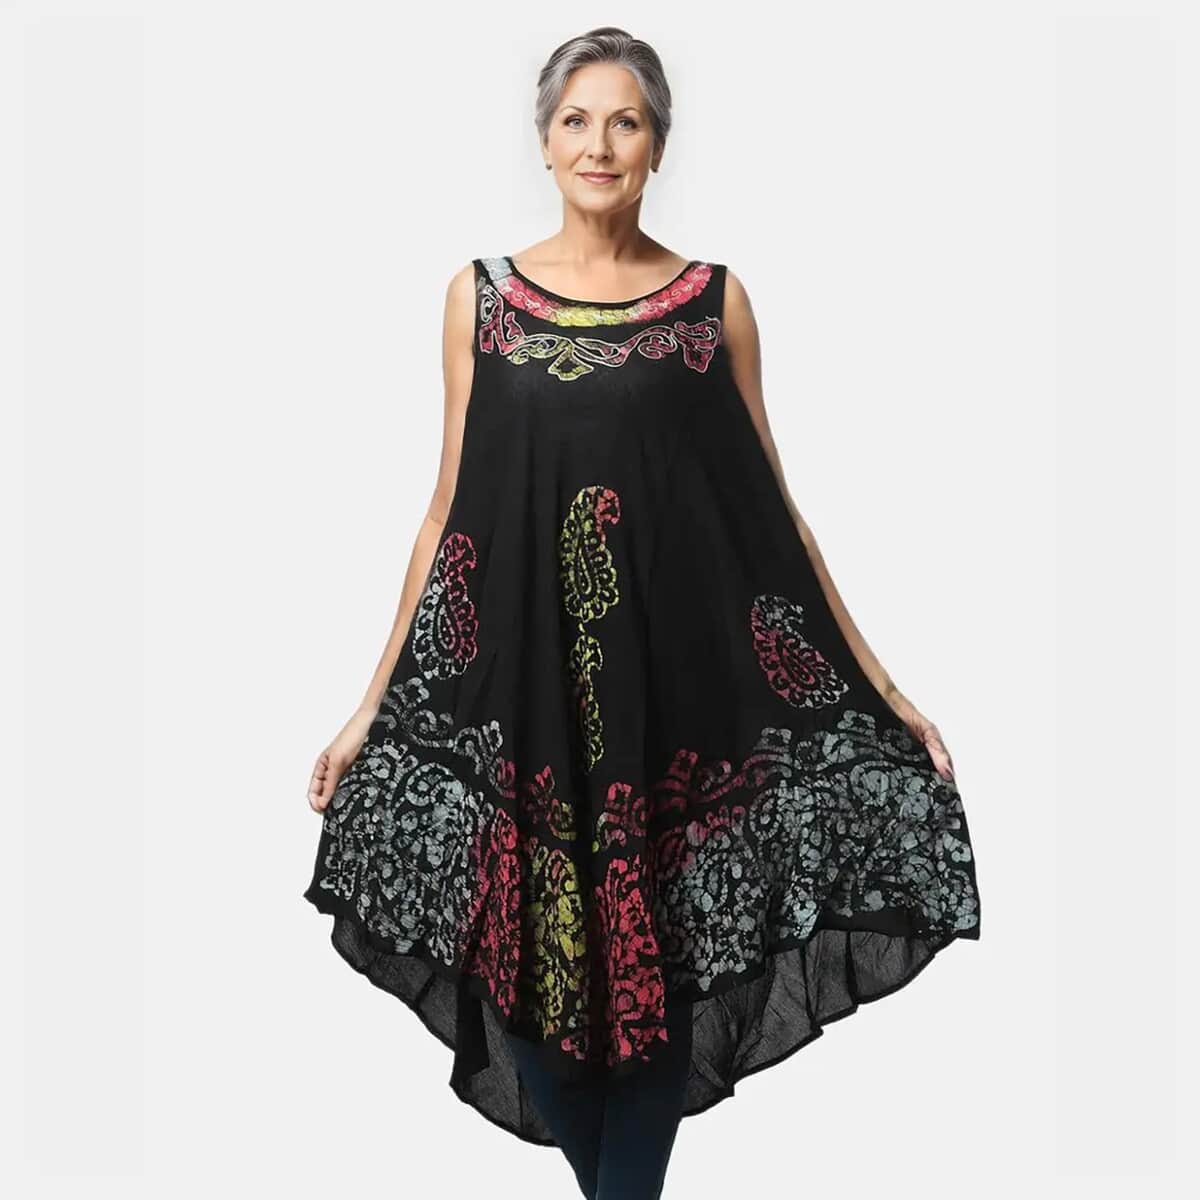 Tamsy Rainbow and Black Butterfly Print Umbrella Dress - One Size Fits Most (48"x44") image number 0